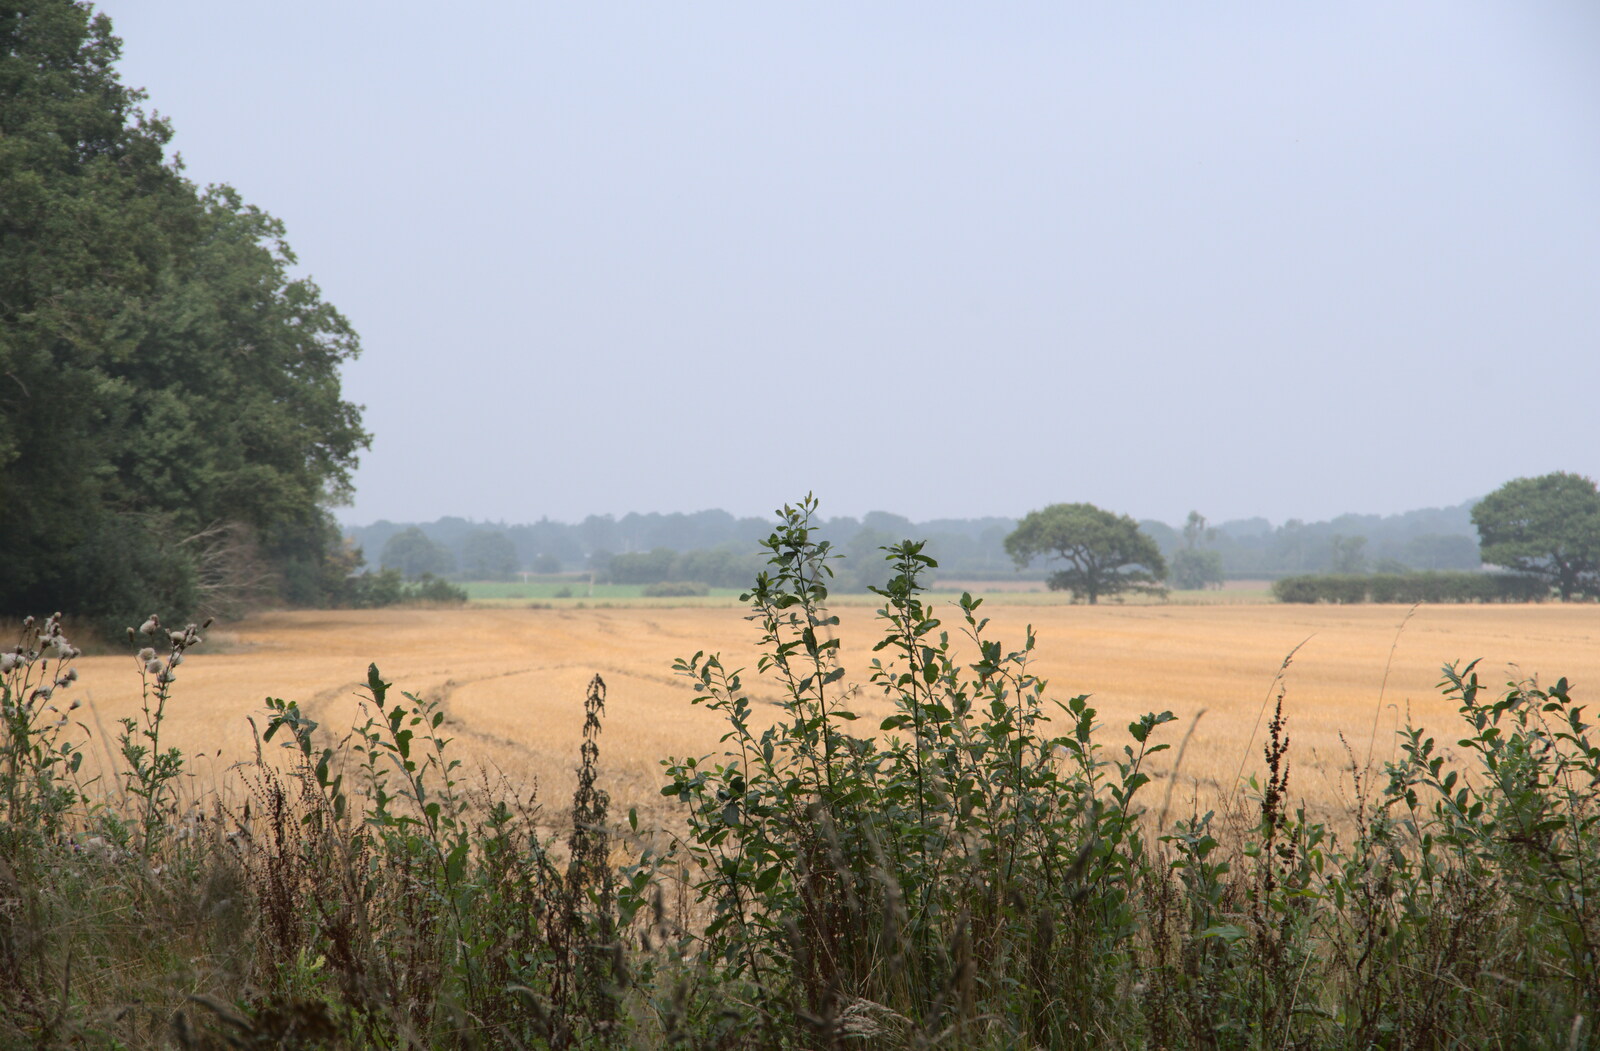 More Norfolk fields from Jules Visits, and a Trip to Tyrrel's Wood, Pulham Market, Norfolk - 16th August 2020